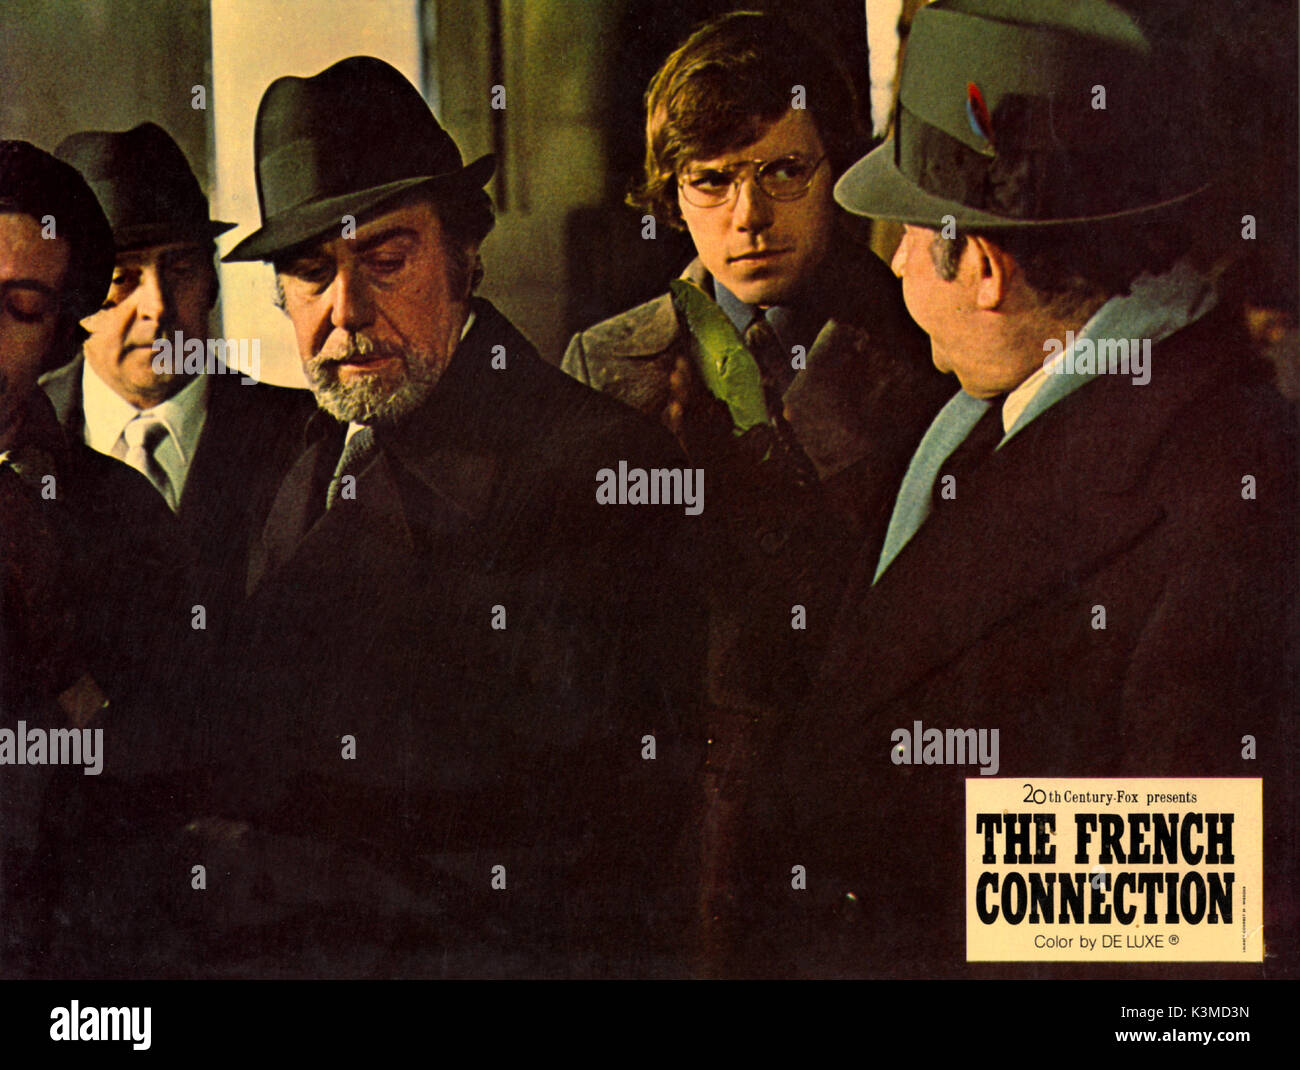 THE FRENCH CONNECTION [US 1971] FERNANDO REY, PATRICK MCDERMOTT     Date: 1971 Stock Photo